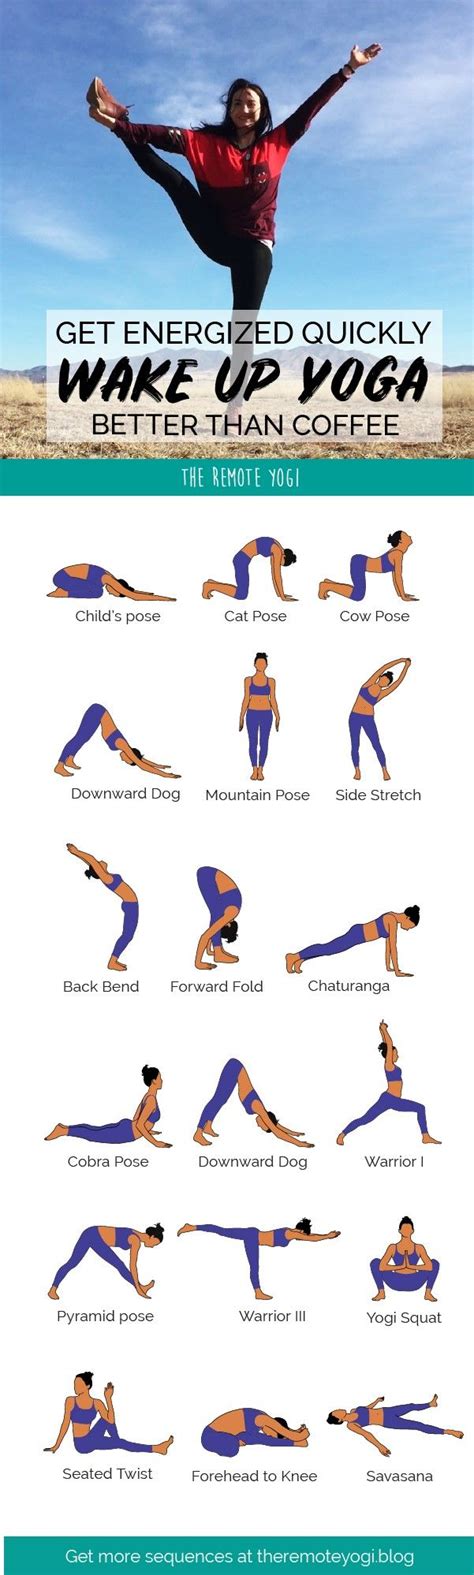 Standing Yoga Postures With Names Pdf Yoga For Strength And Health